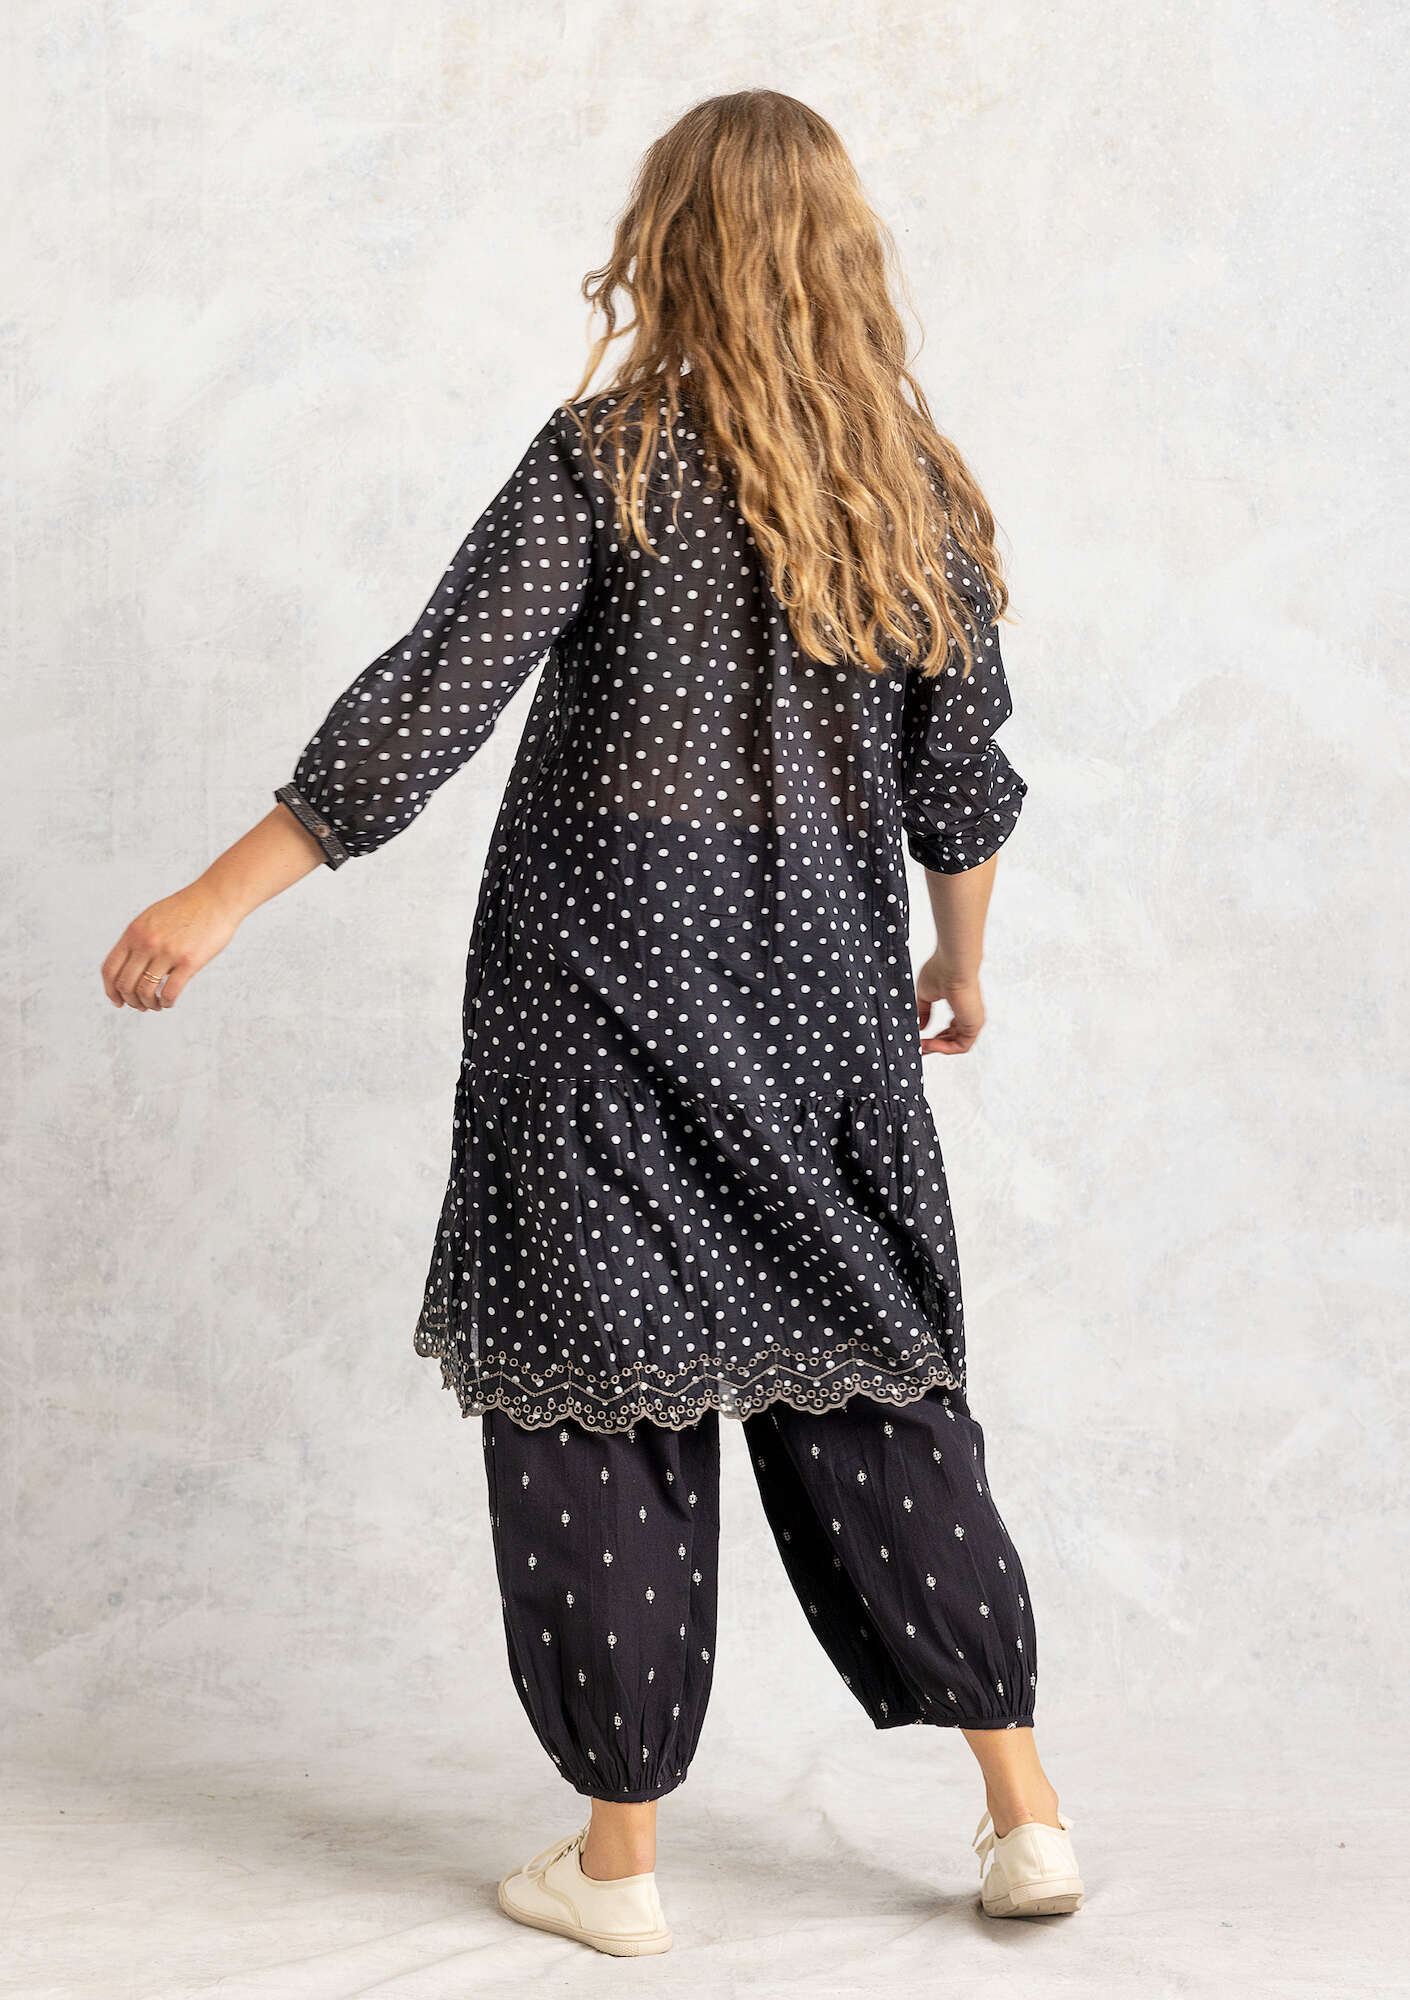 Woven “Lilly” dress in organic cotton black